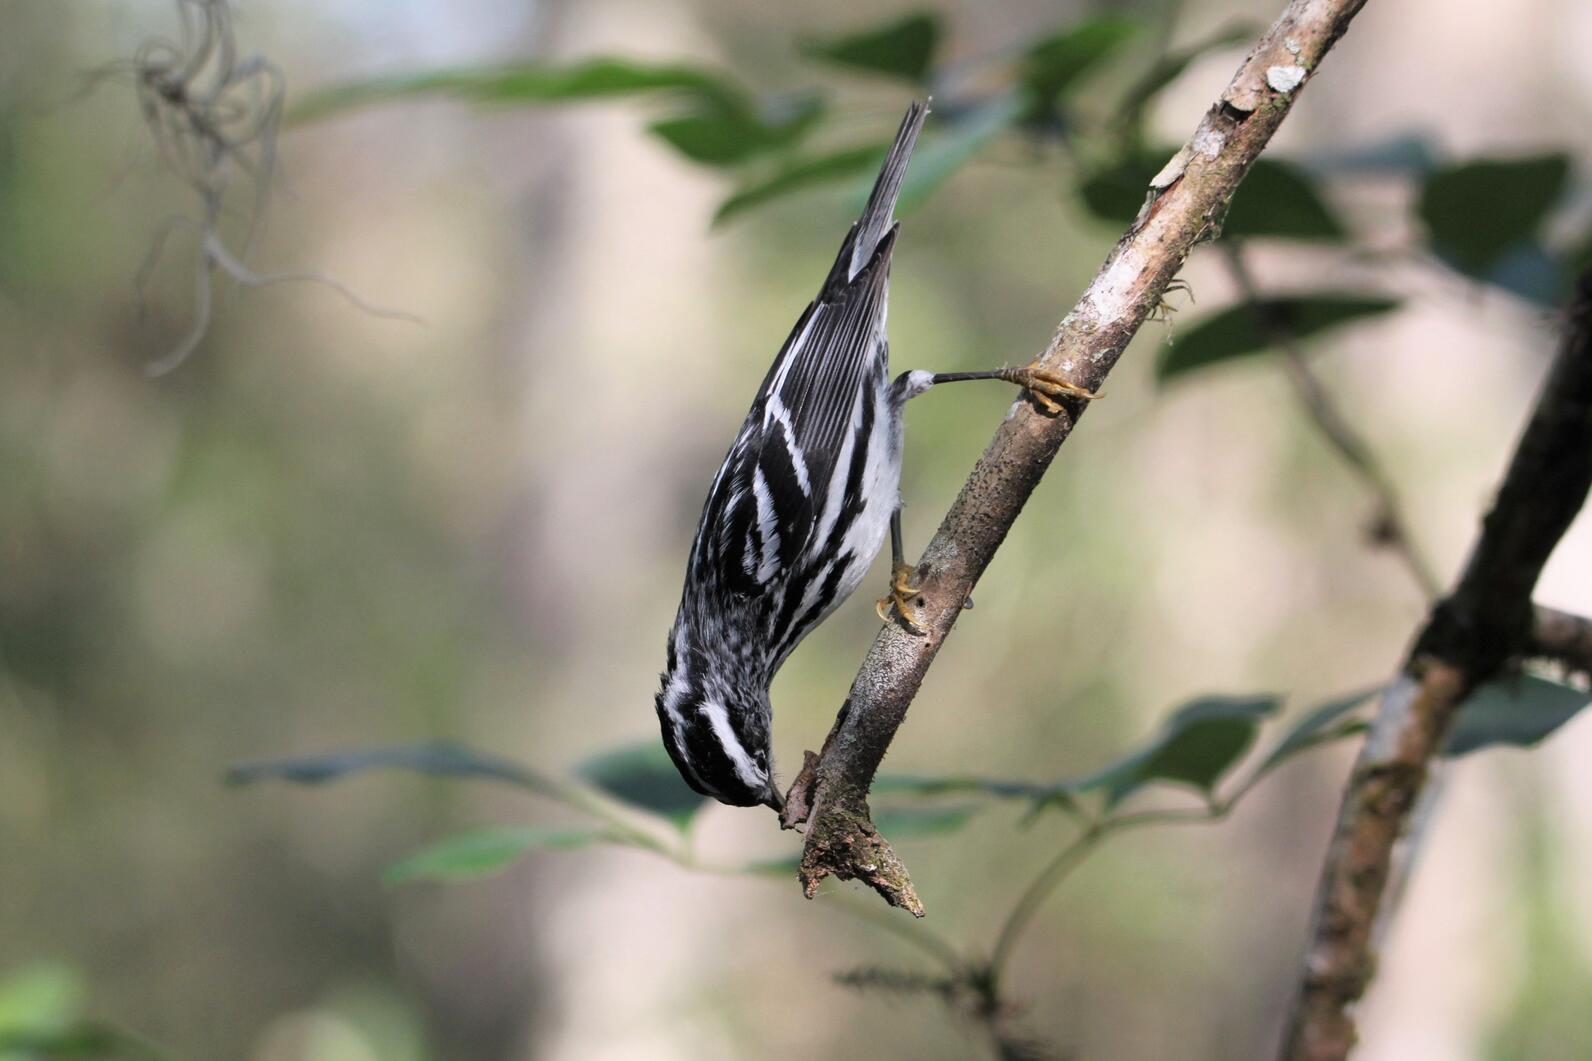 A black and white warbler on a tree